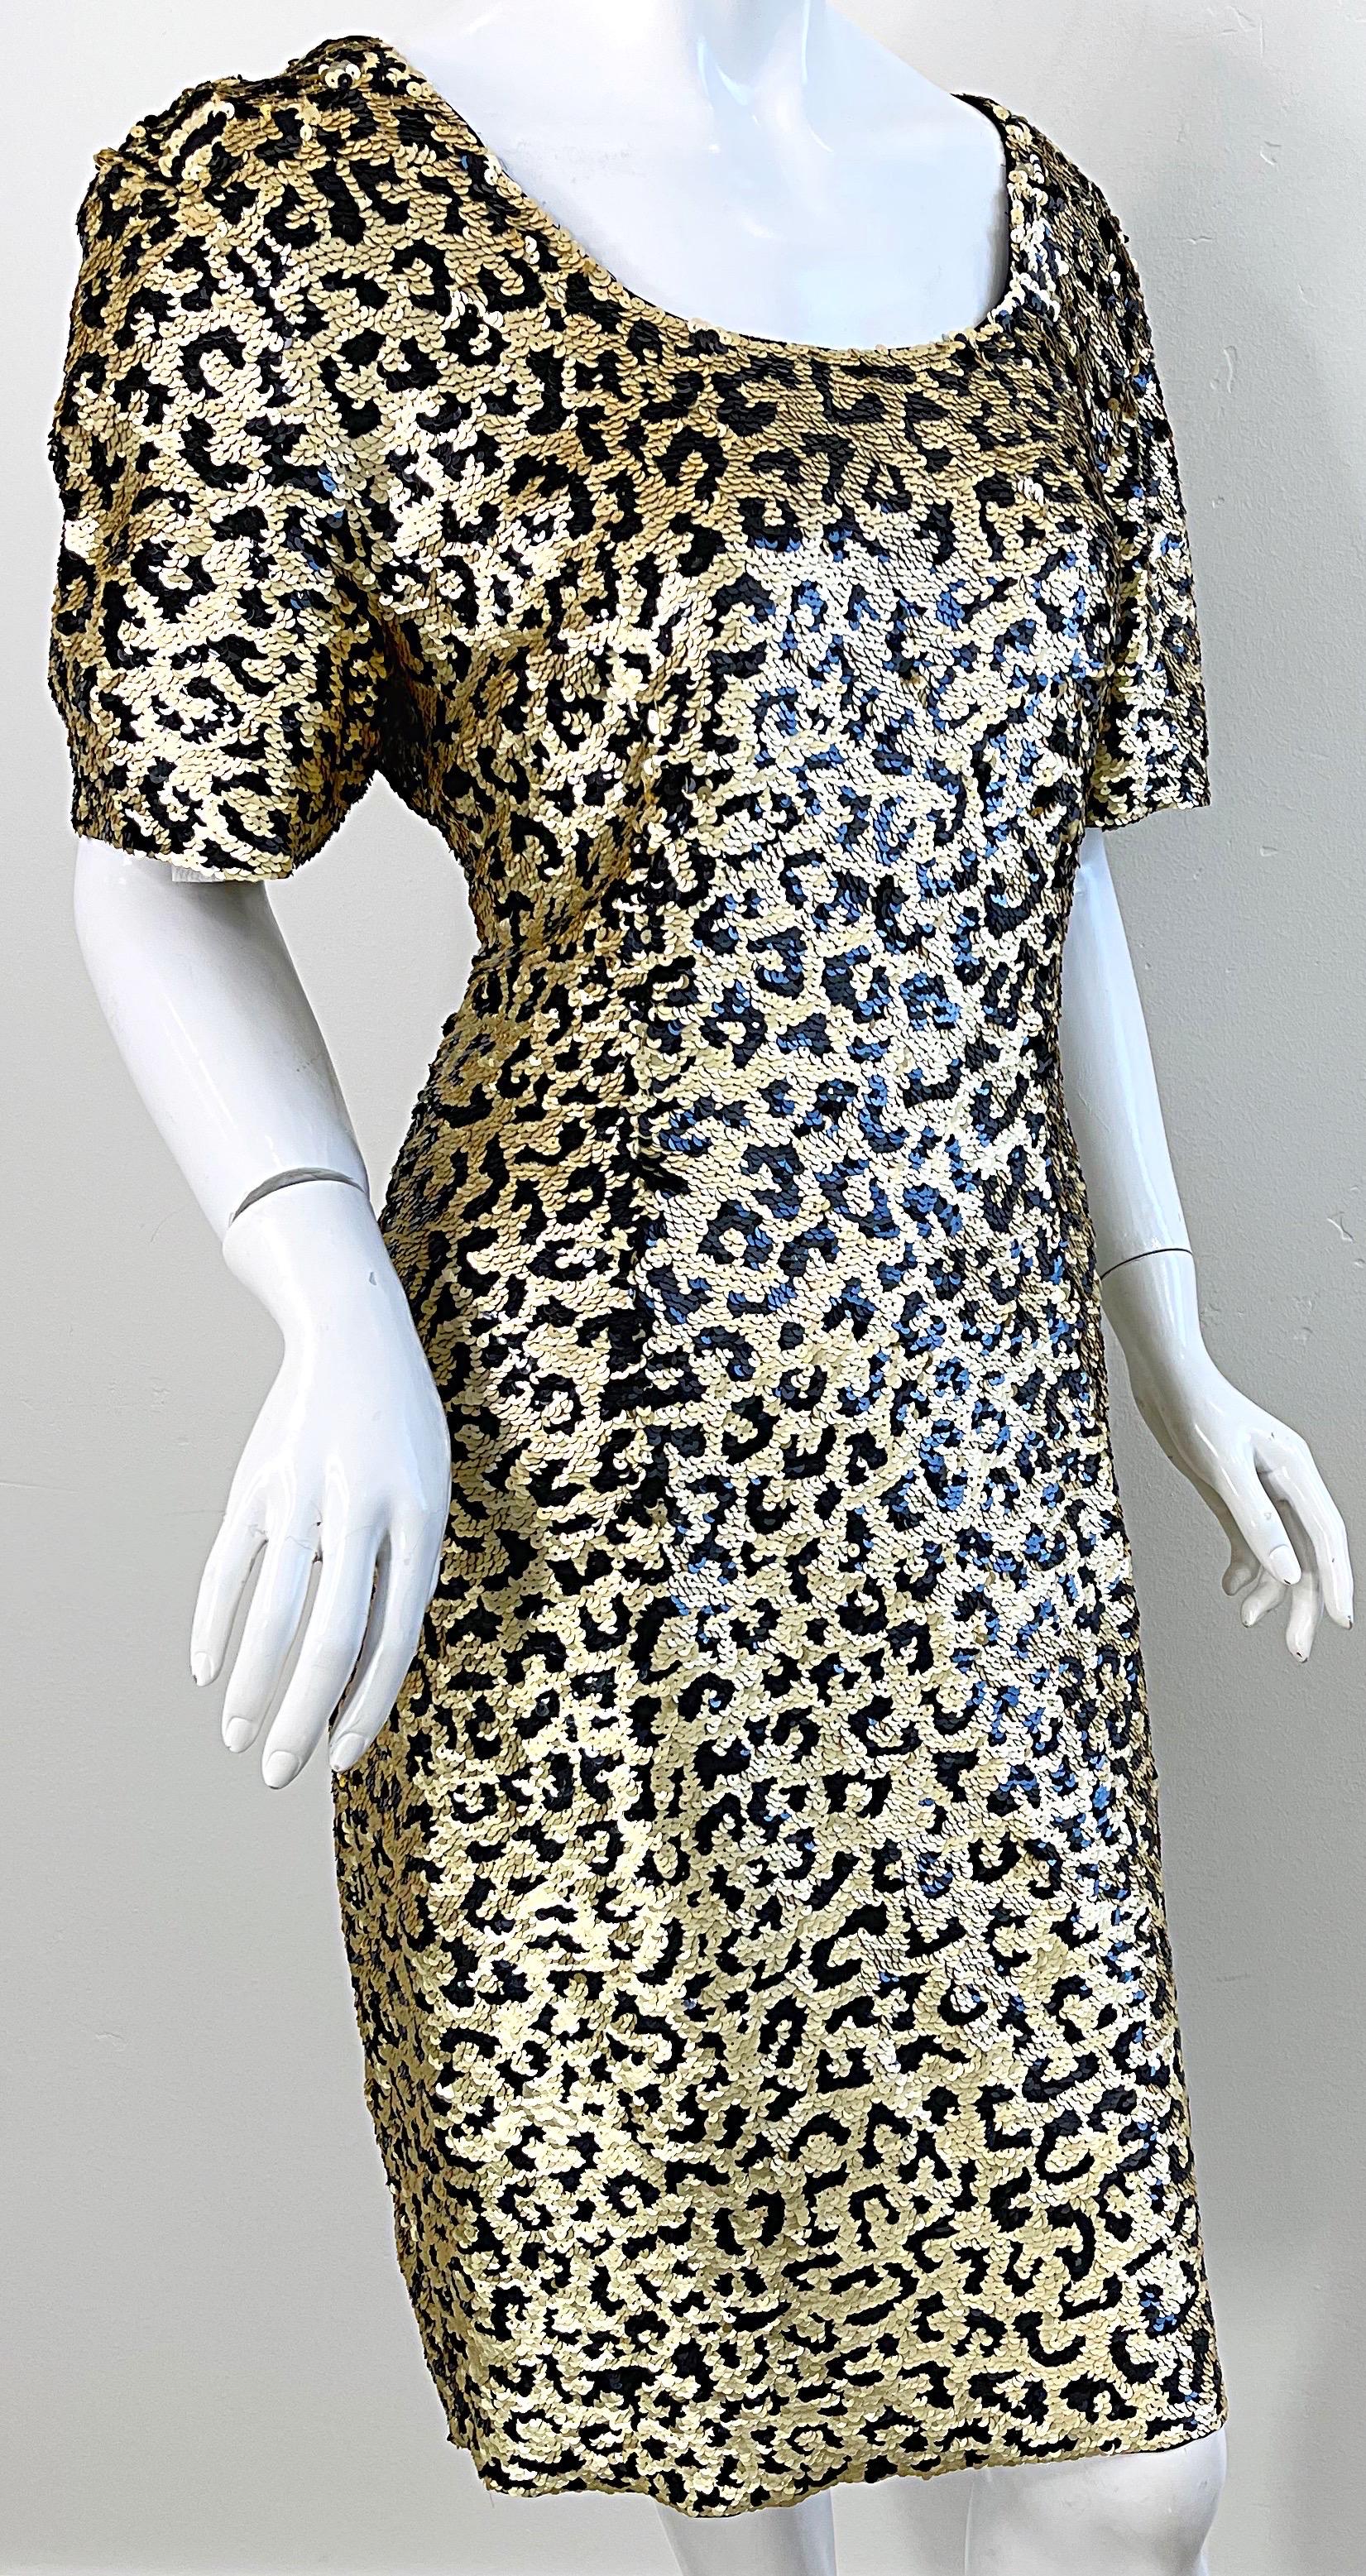 1980s Oleg Cassini Size 12 / 14 Sequin Leopard Animal Cheetah Print 80s Dress In Excellent Condition For Sale In San Diego, CA